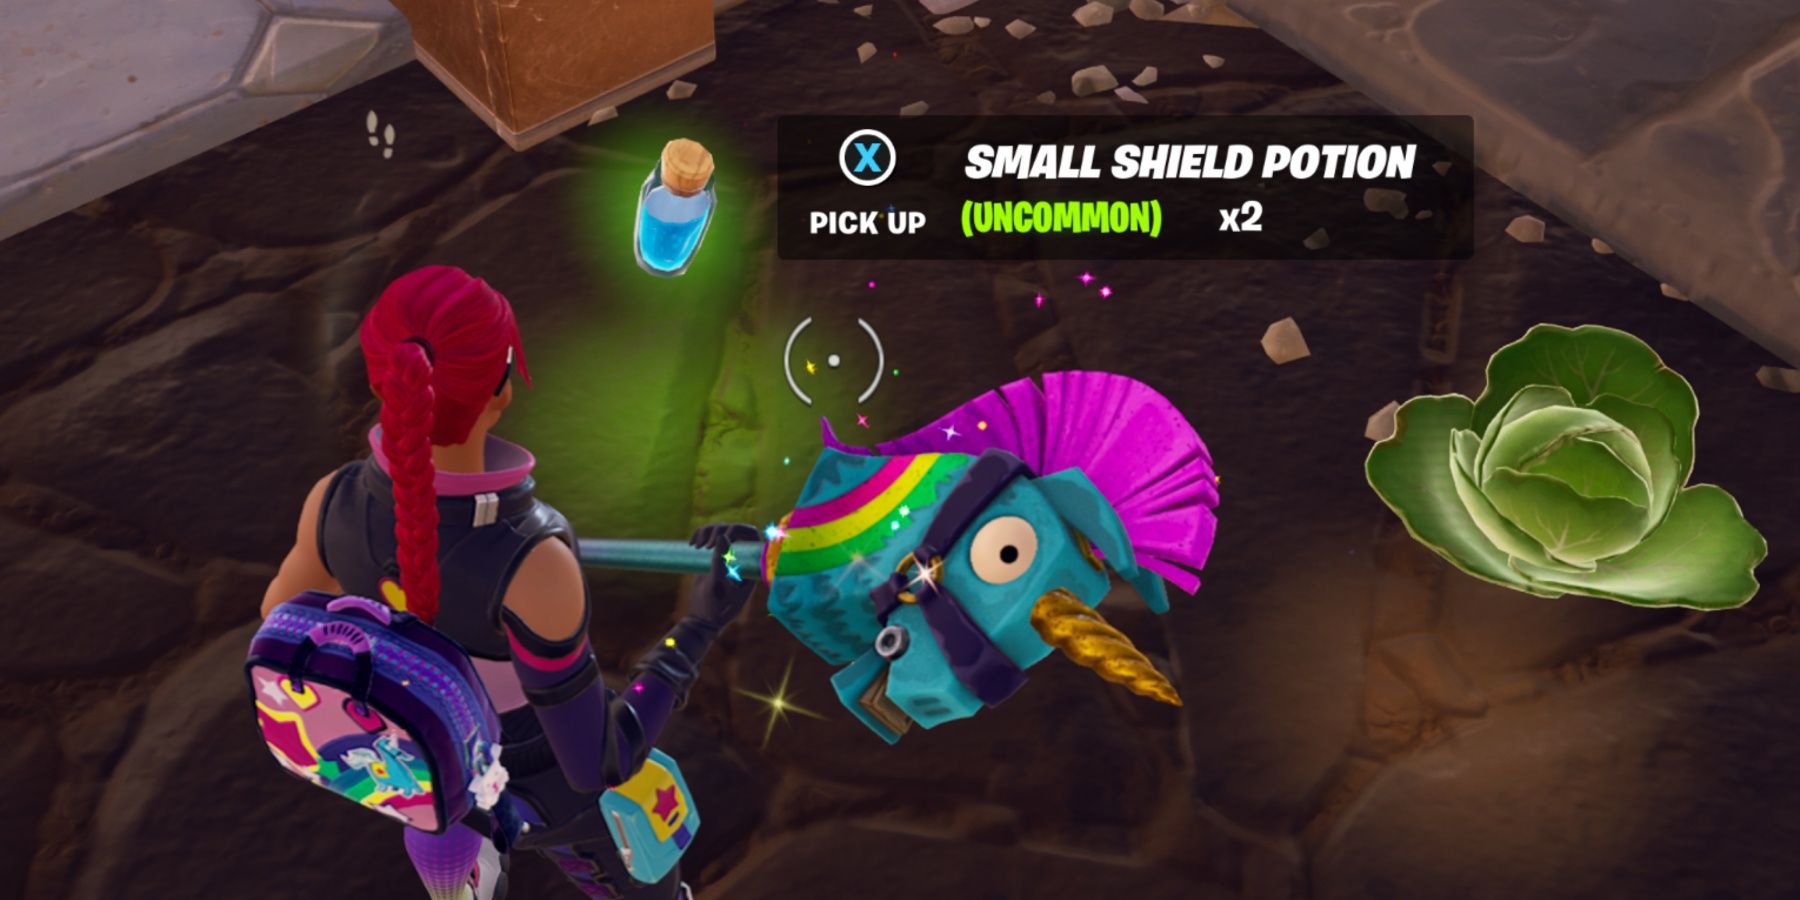 finding small shield potion on the ground